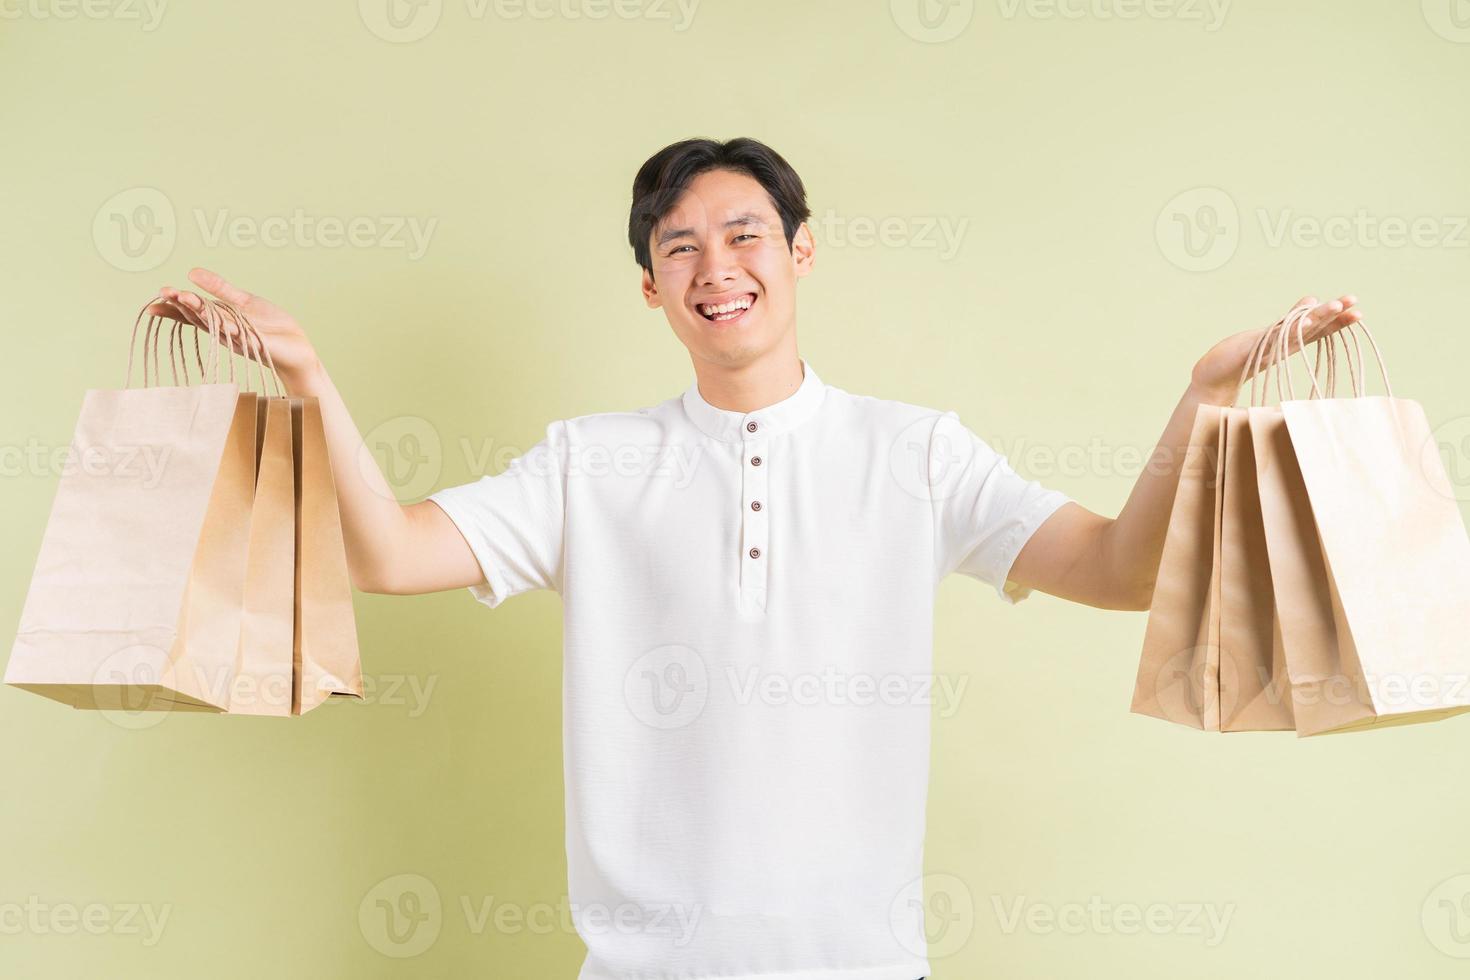 The handsome Asian man is holding paper bags in his hand photo